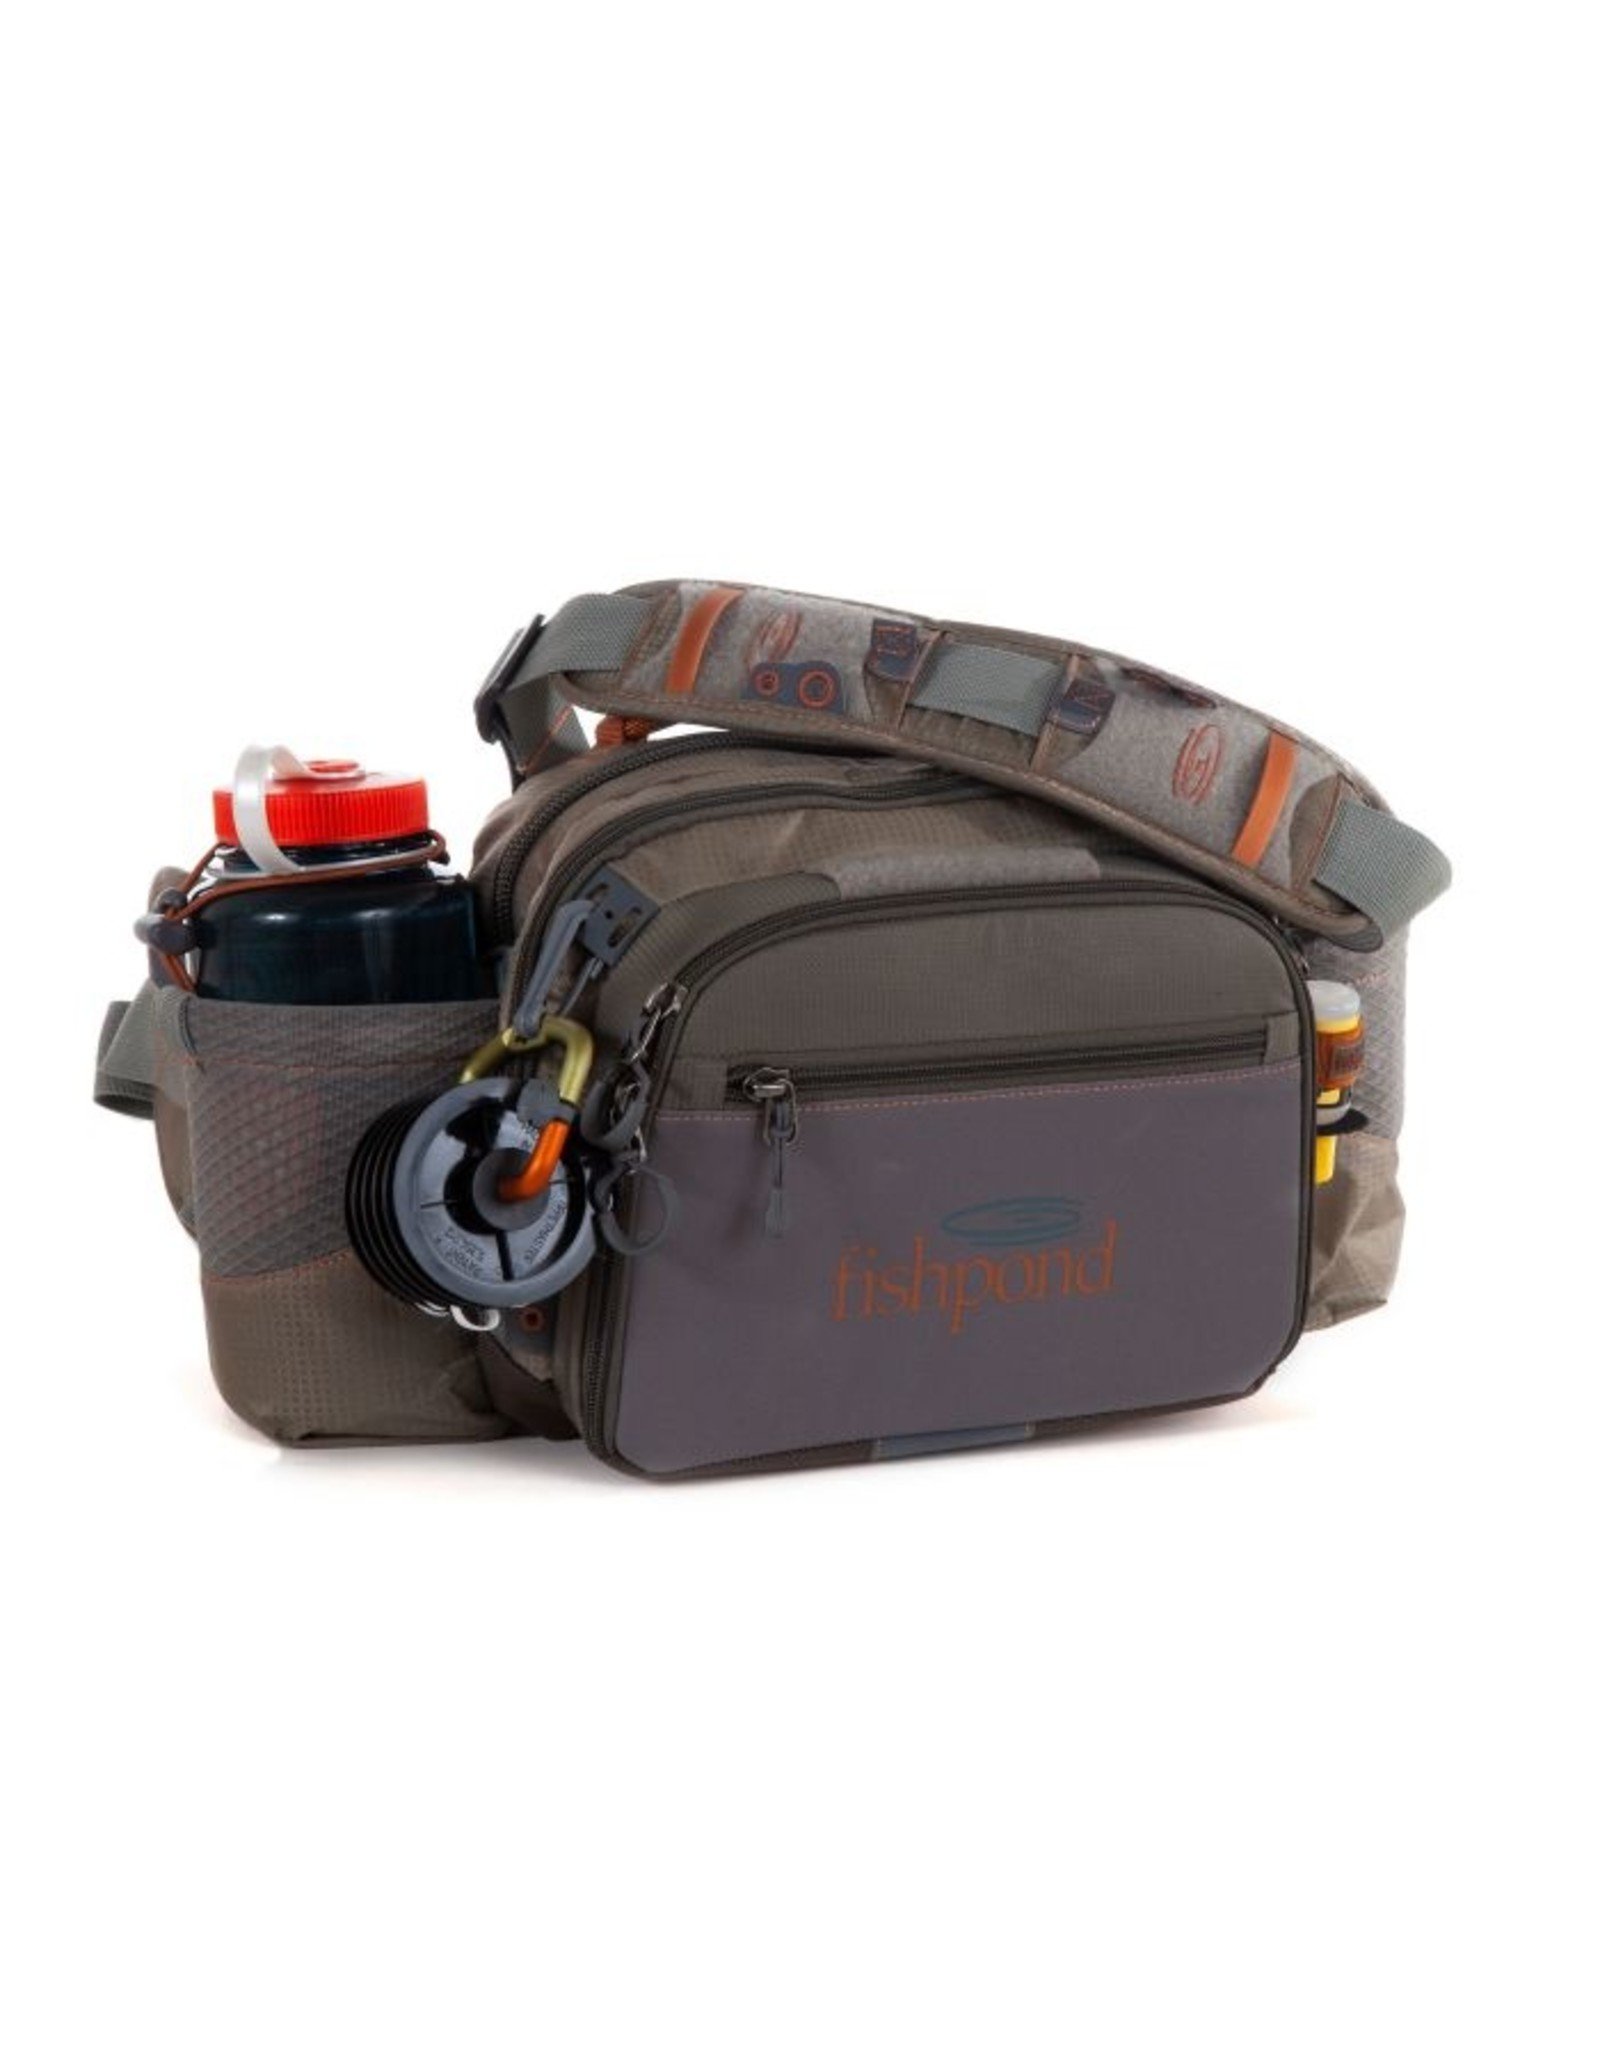 Fishpond Fishpond - Waterdance Pro Guide Pack